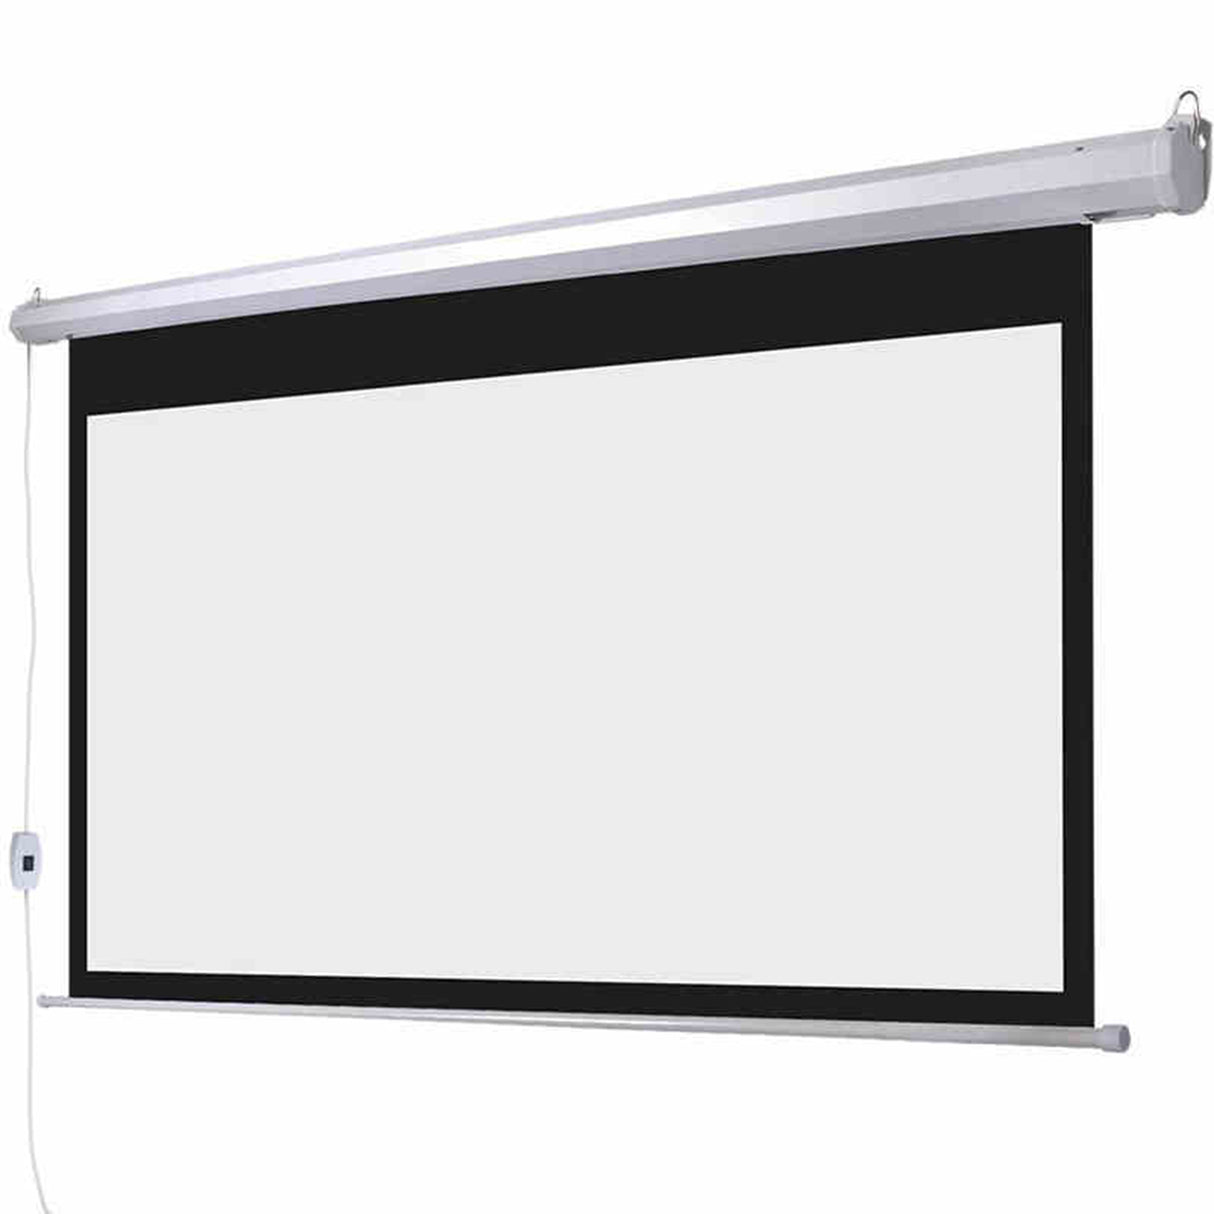 RNT Projection Screen Motorised 180 Inches - 16:9 Ratio